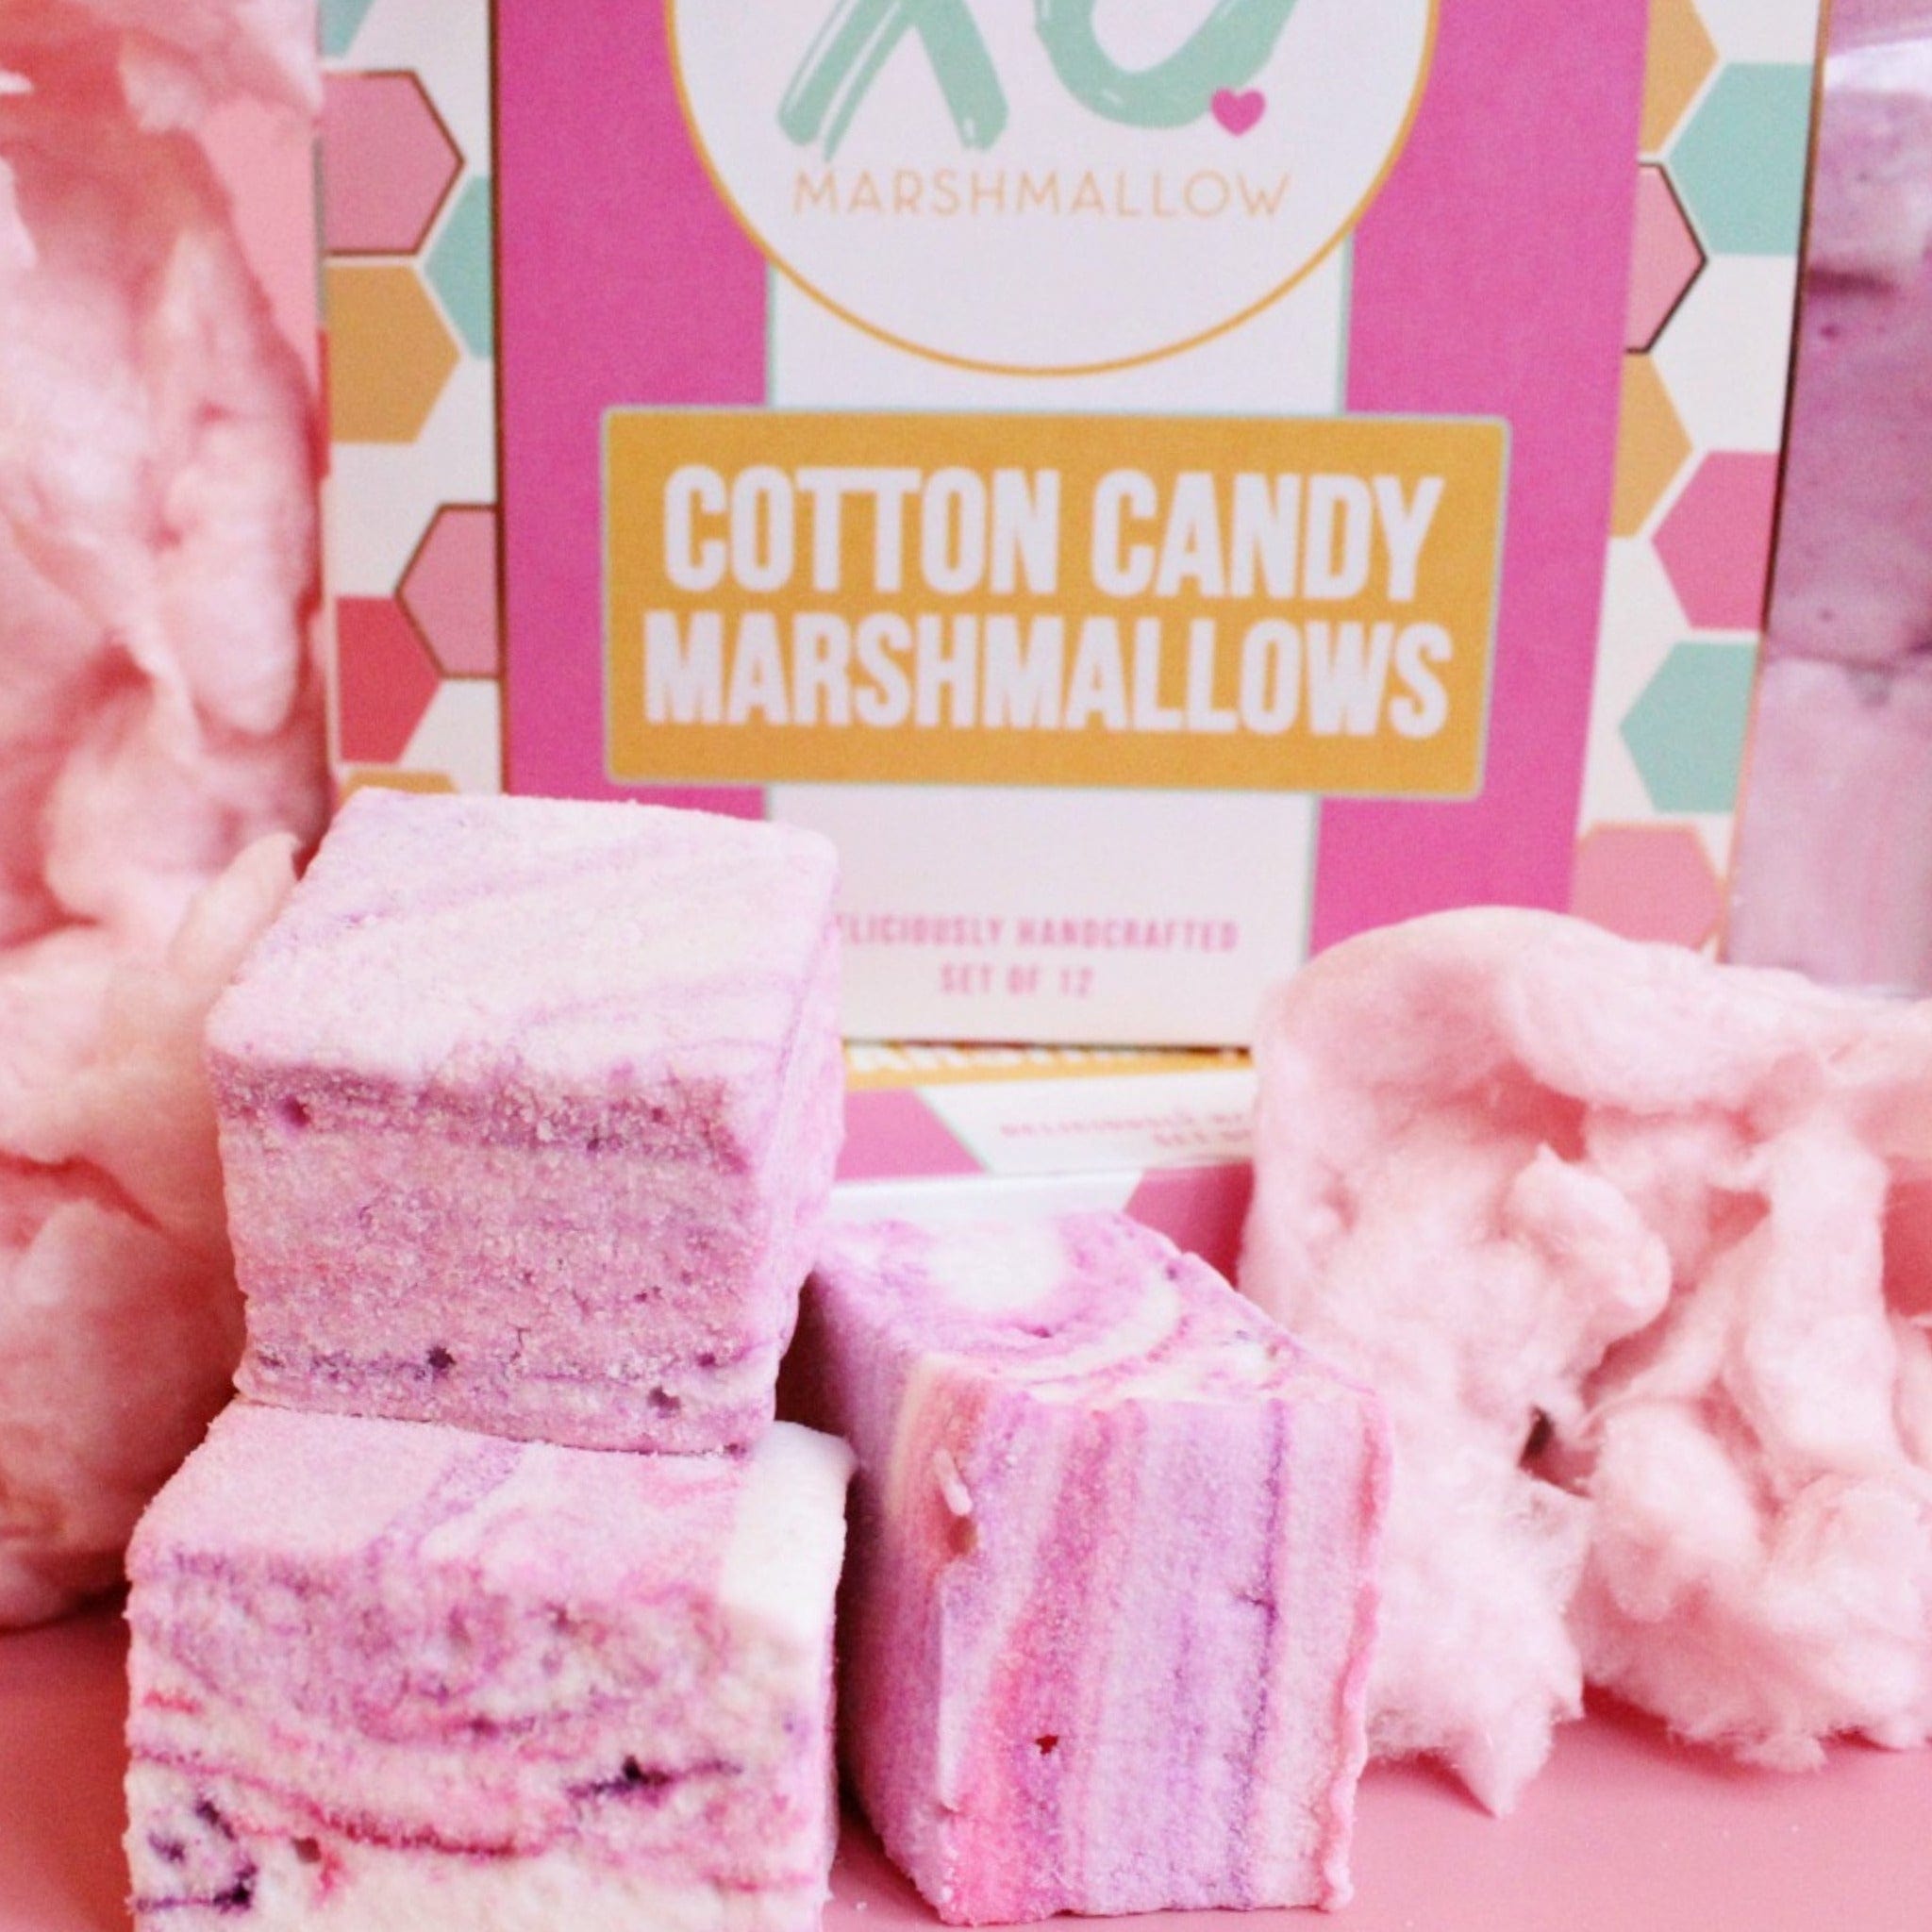 Cotton Candy Marshmallow Box 12 Count - Lolli and Pops